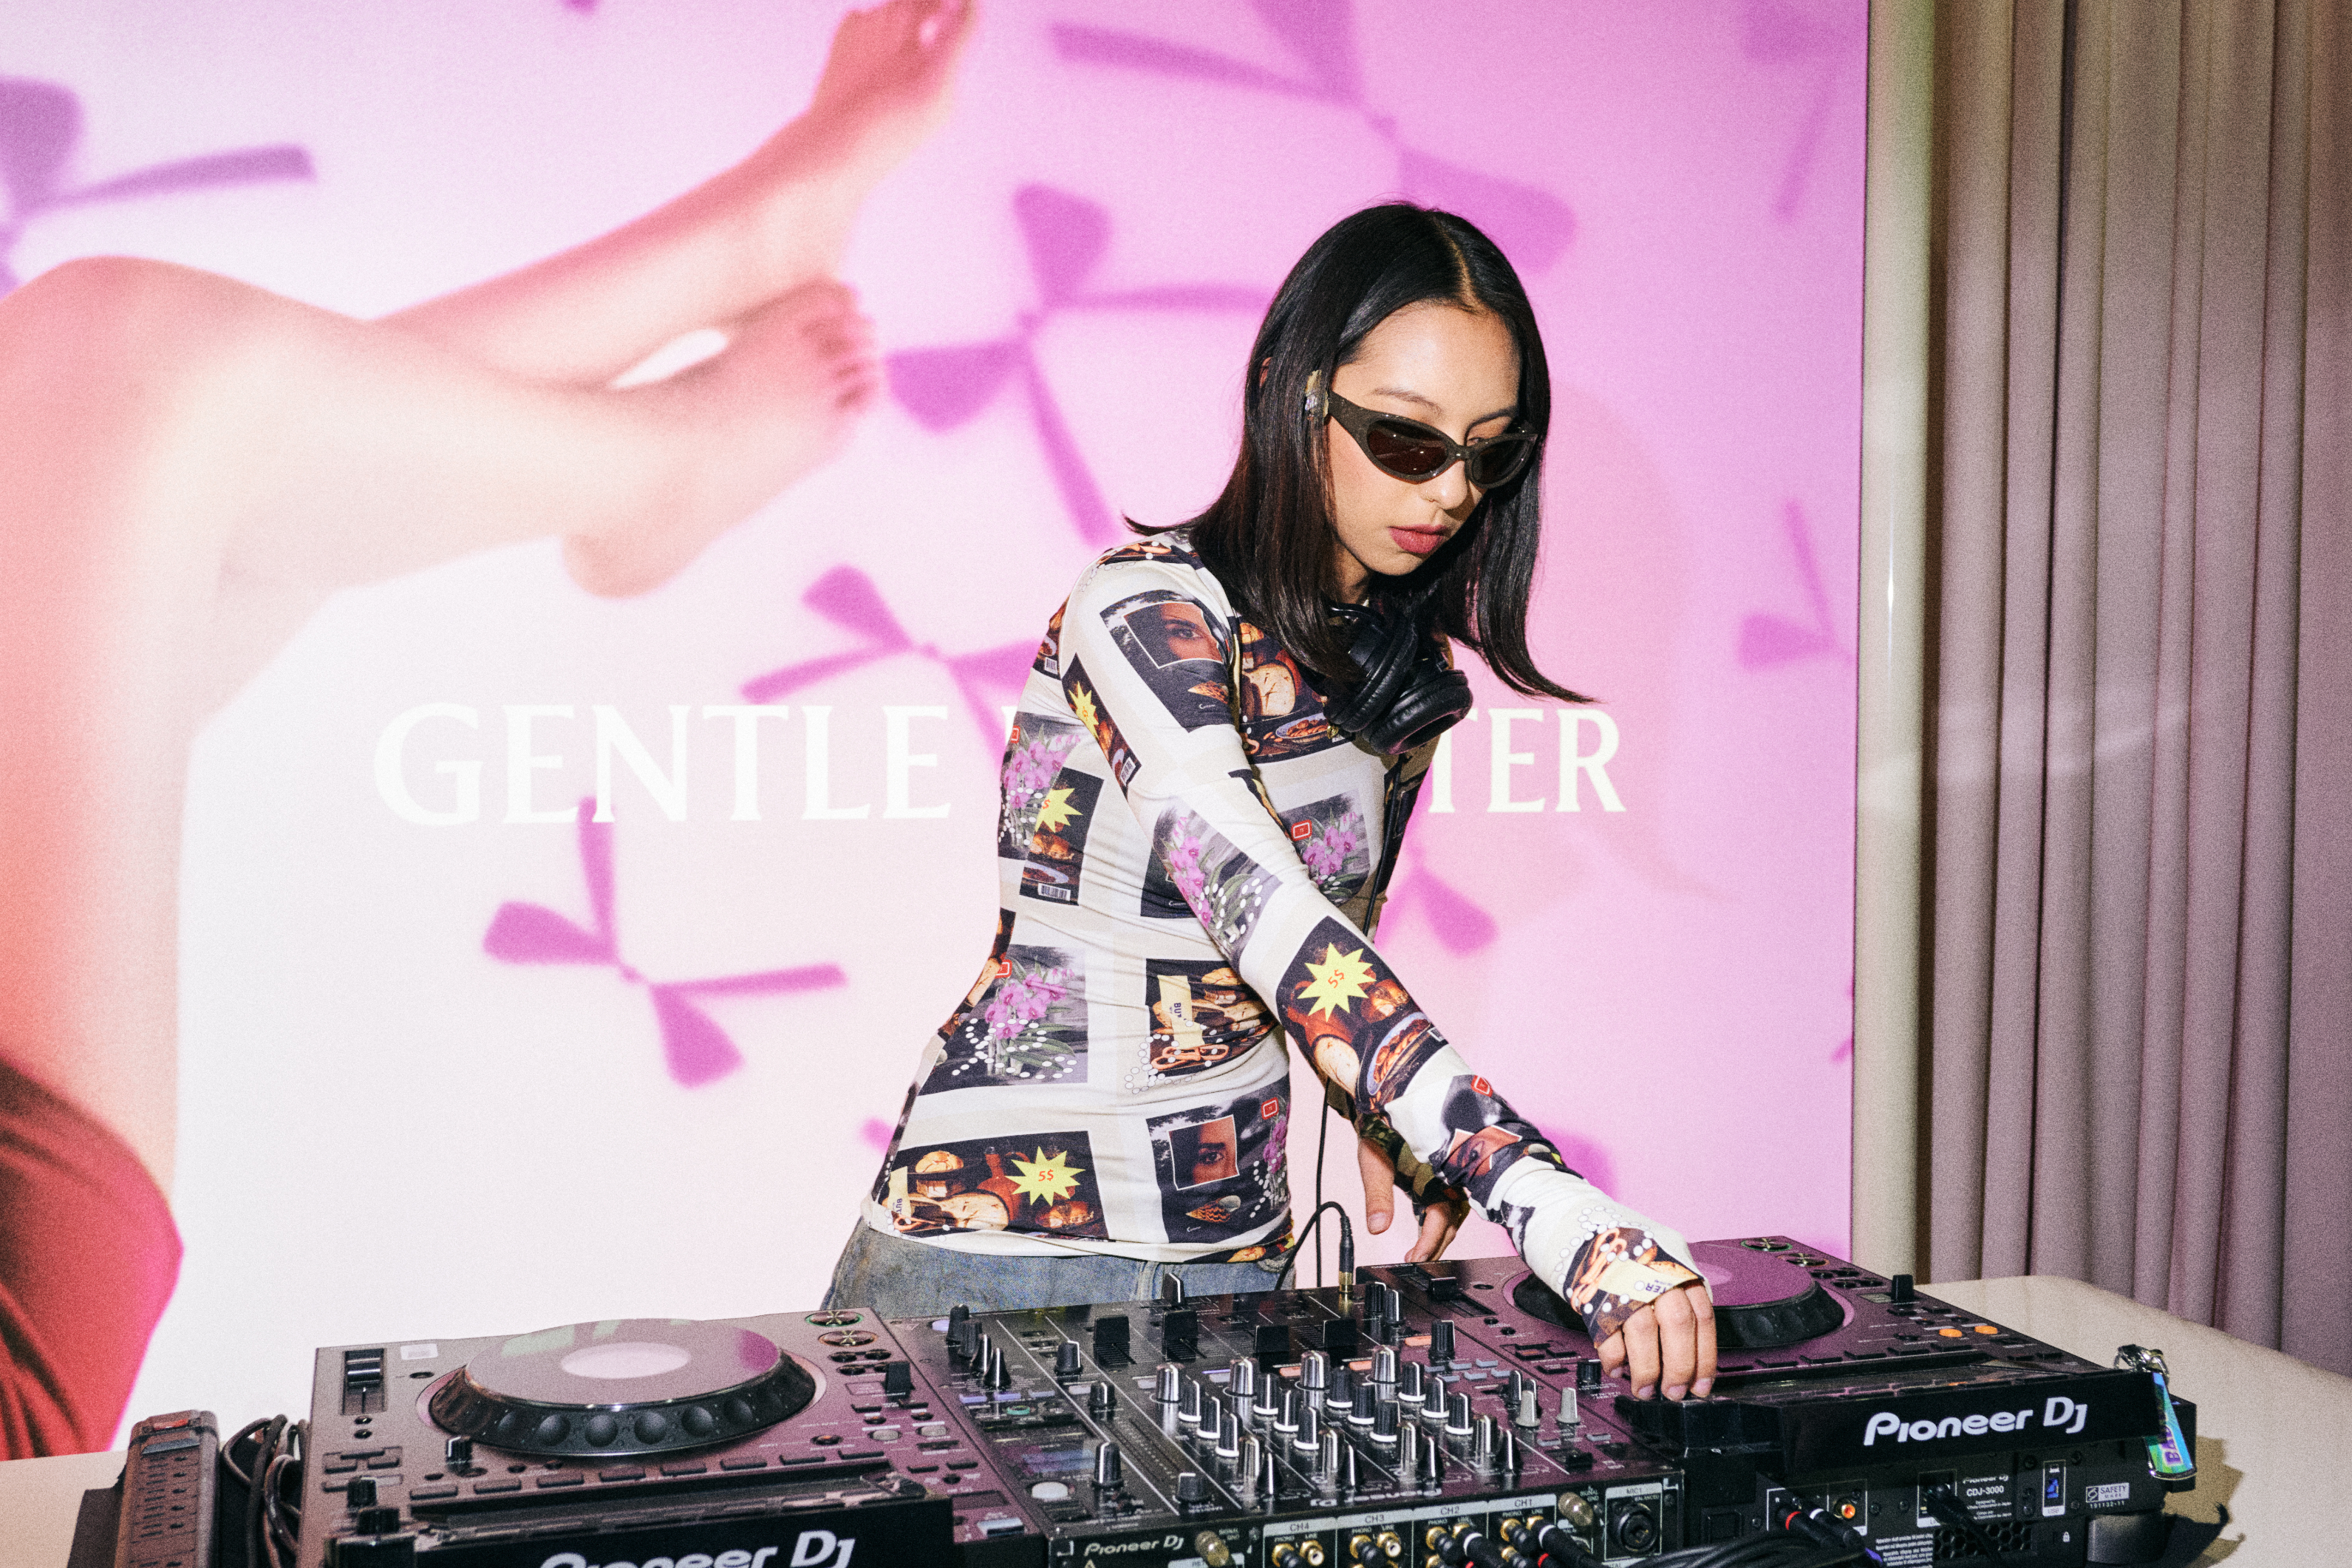 DJ wearing a printed long-sleeve top and sunglasses at a mixer beside a Gentle Monster ad